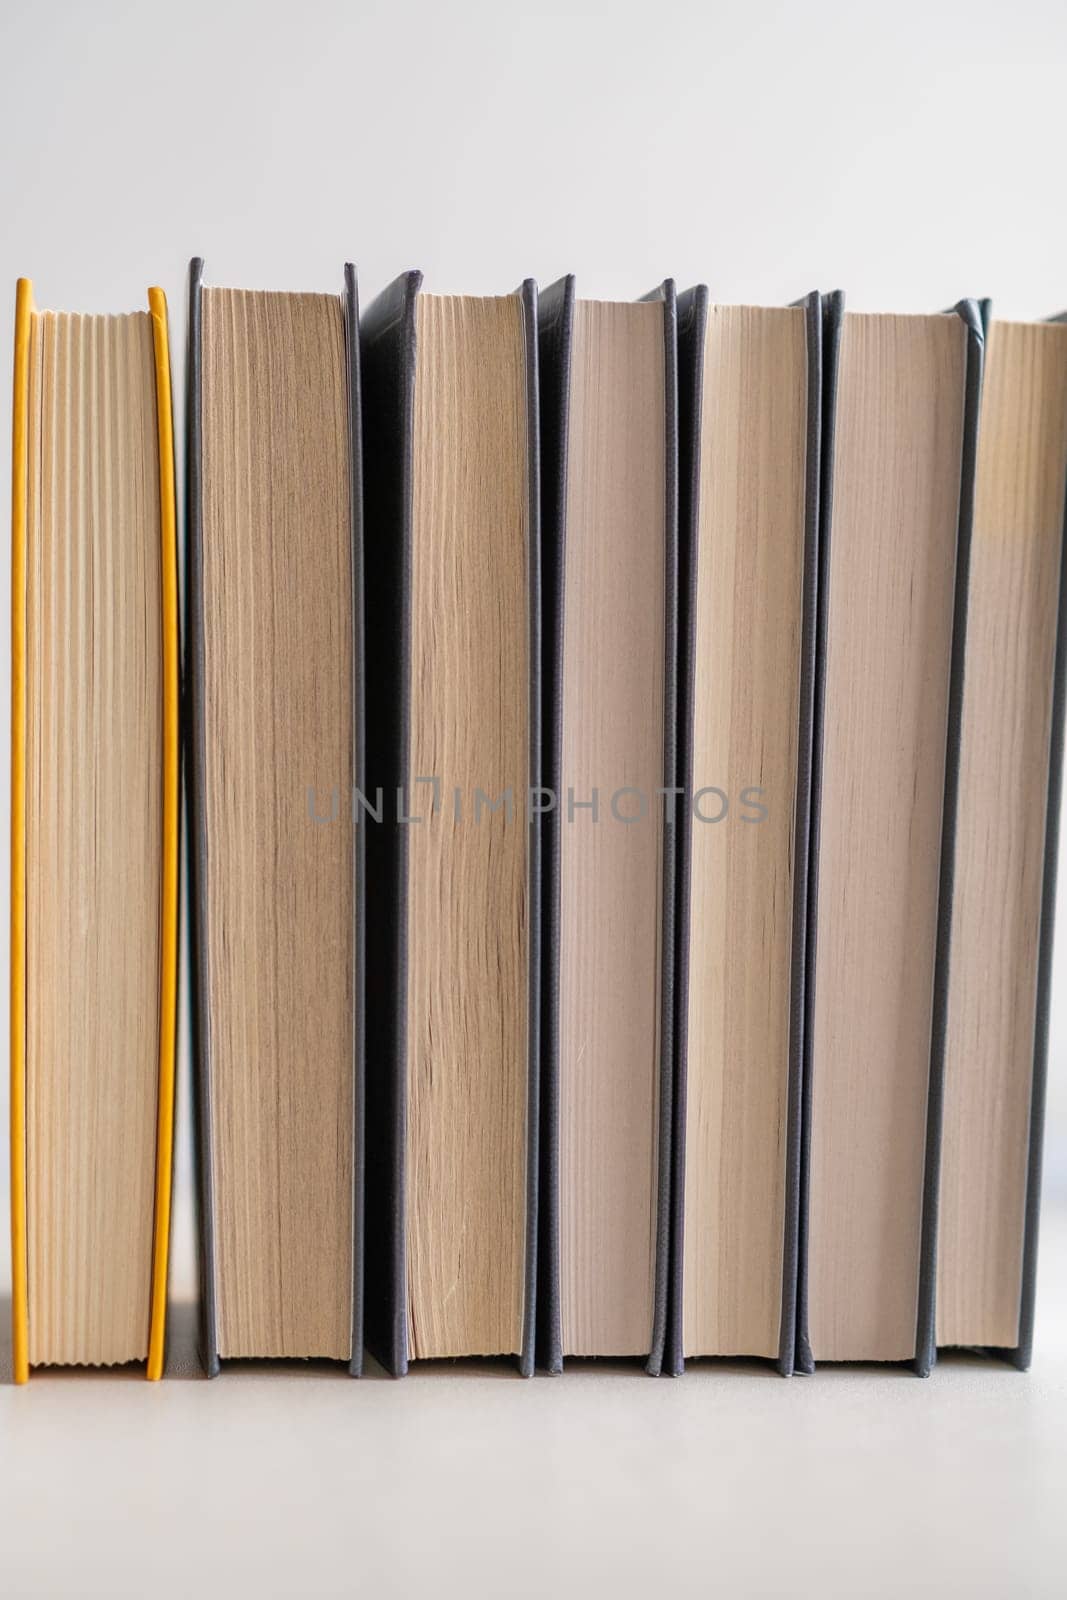 Stack of books on a white background. One book is yellow. Book reading and learning concept.